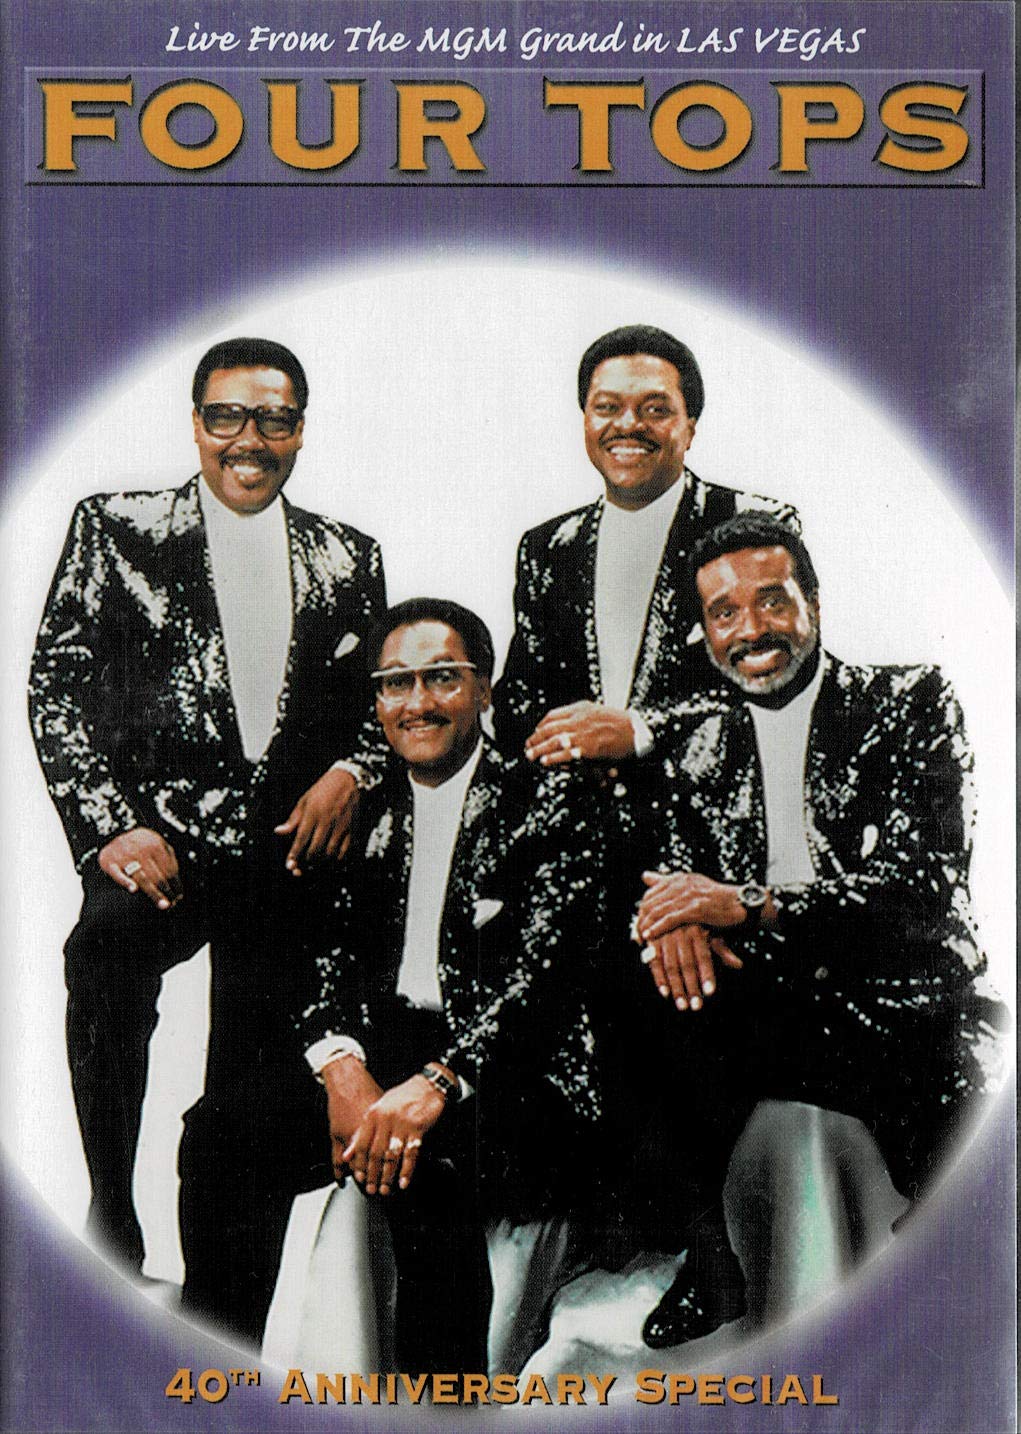 The Four Tops - 40th Anniversary Special